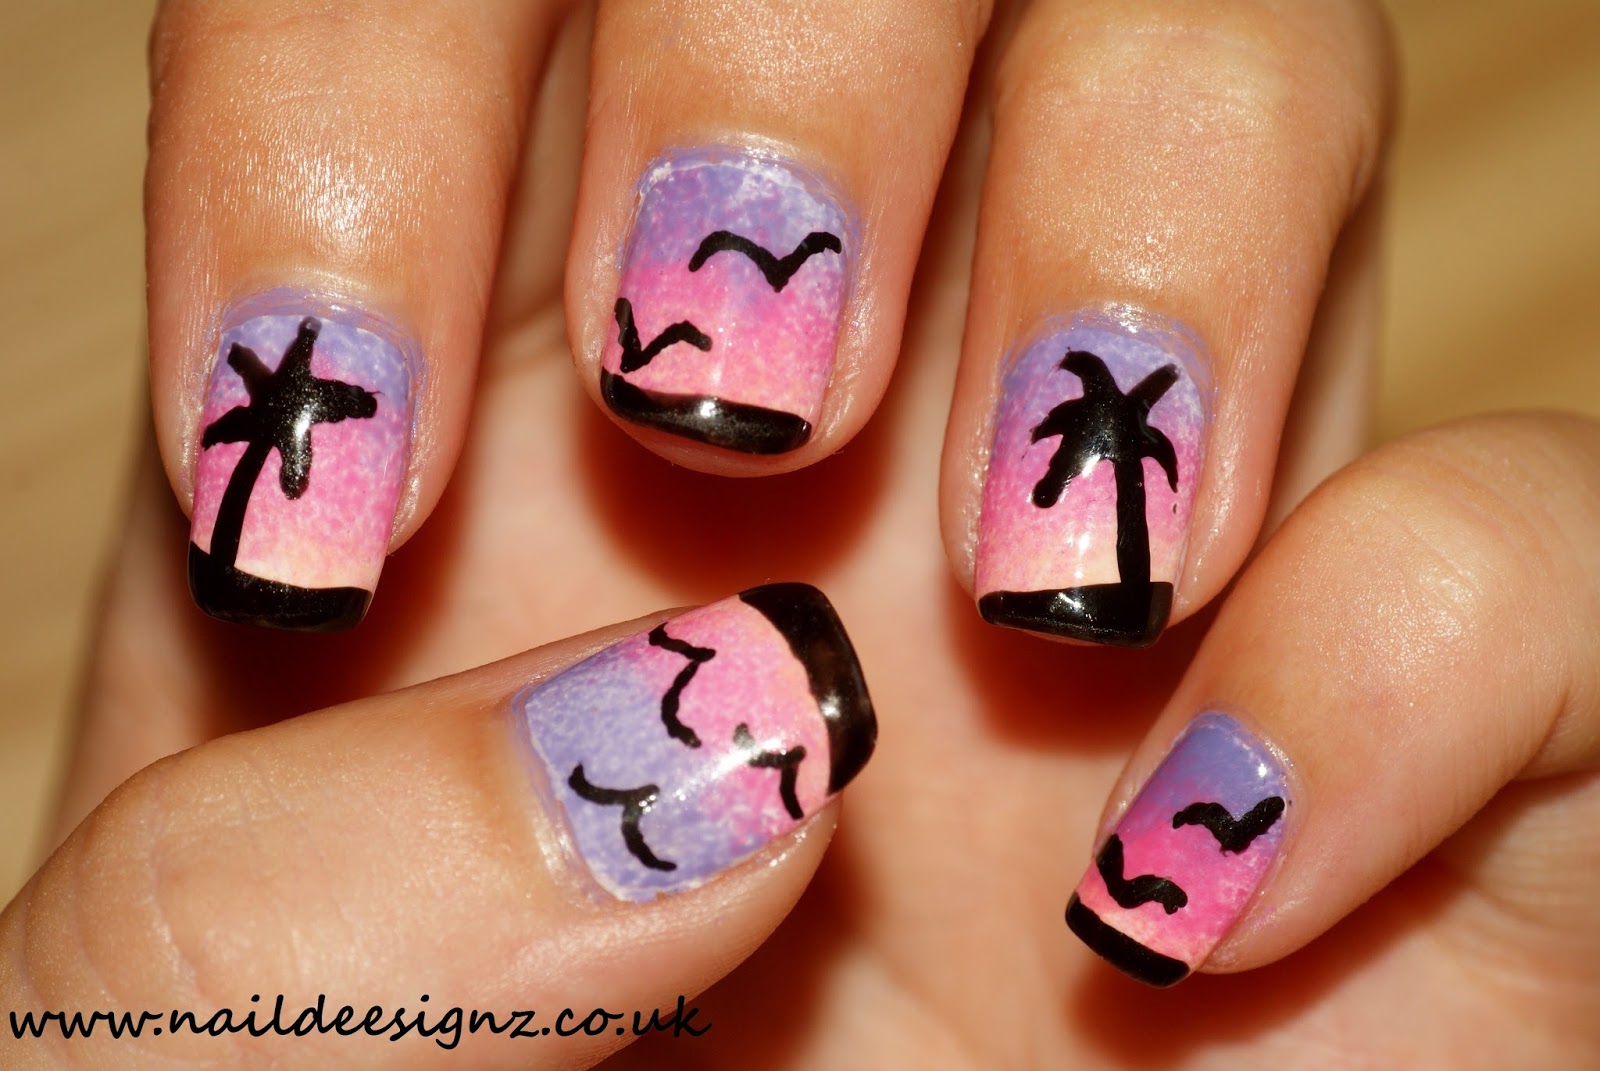 5. Sunset Ombre Nail Designs for Acrylic Nails - wide 5